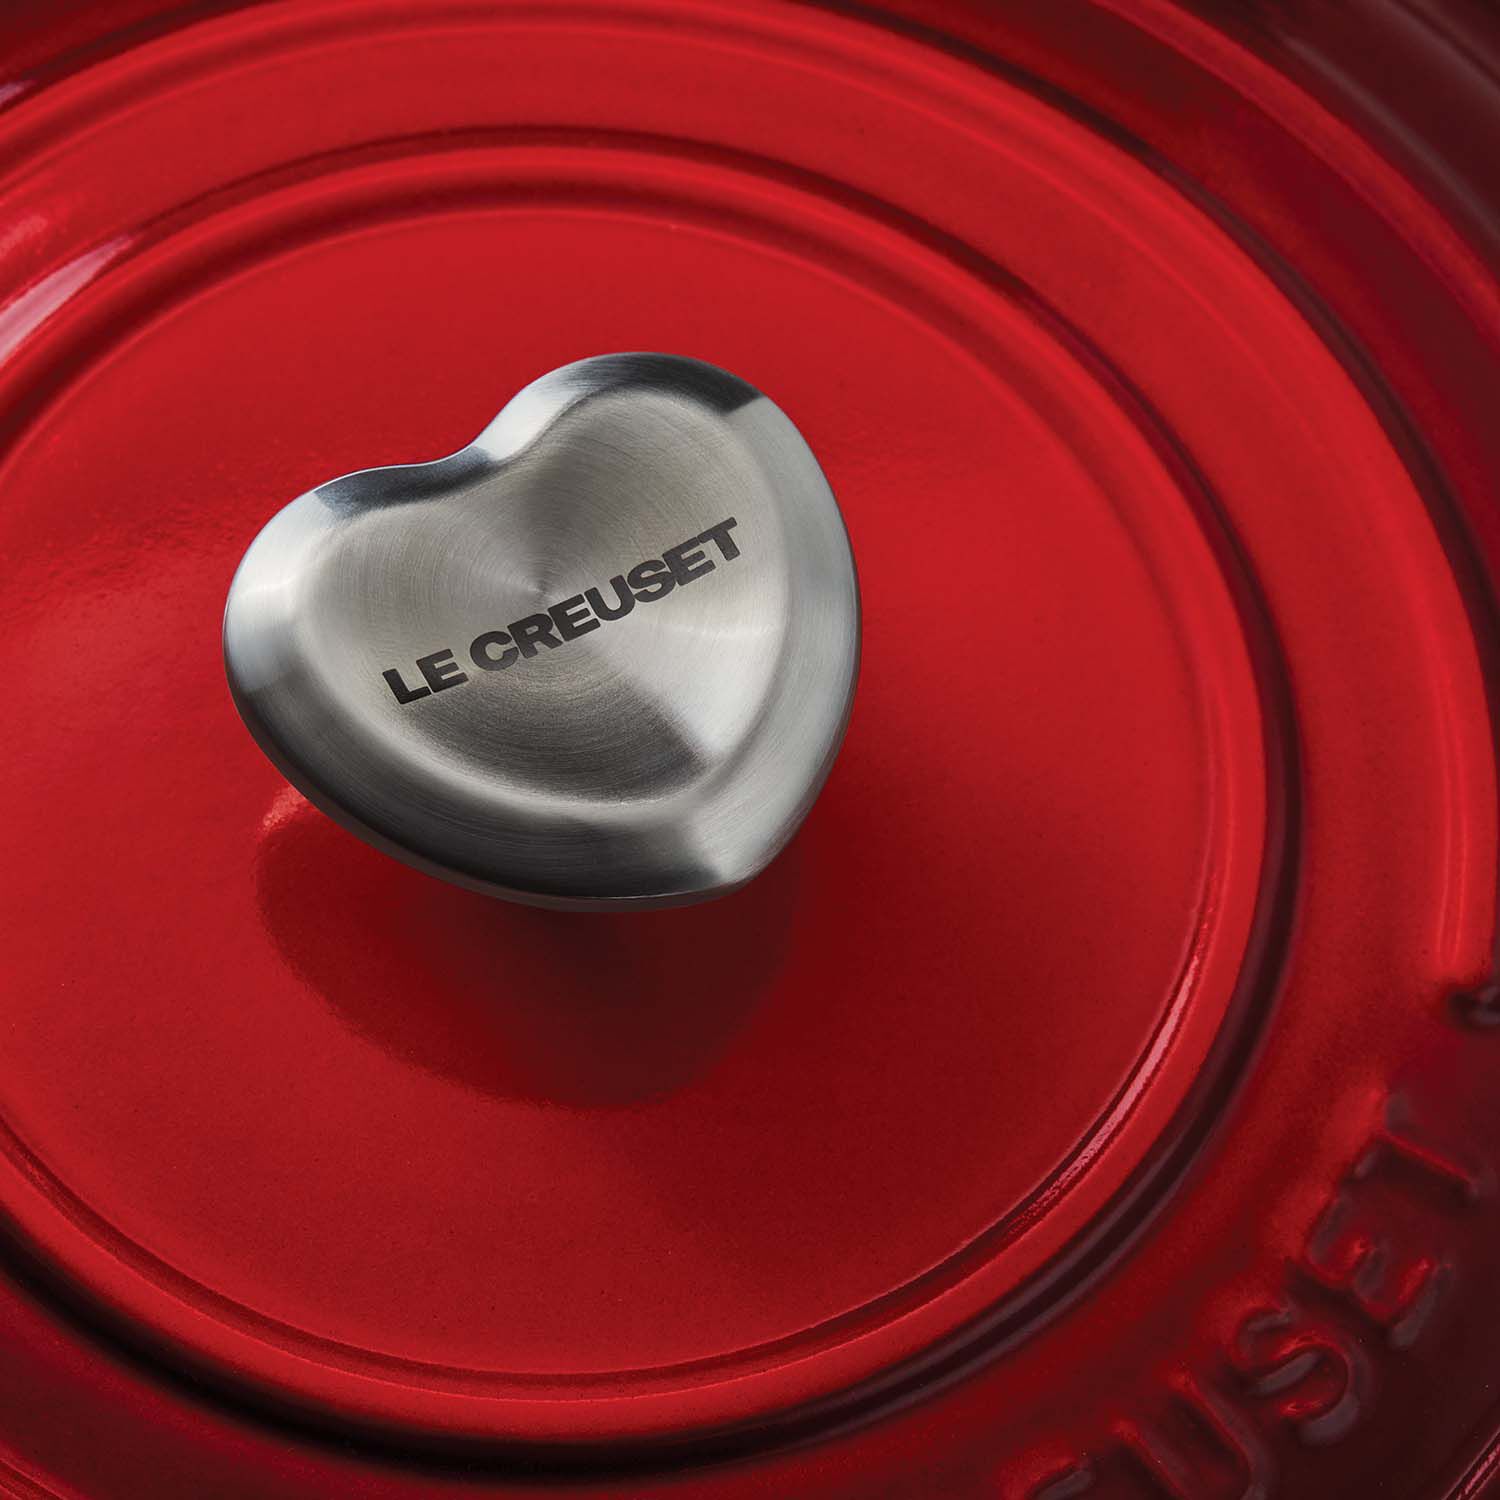 Le Creuset L2002-0214 Enameled Cast Iron 1 1/8 quart Shallow Heart Oven with Stainless Steel Knob Hibiscus 1-1/8